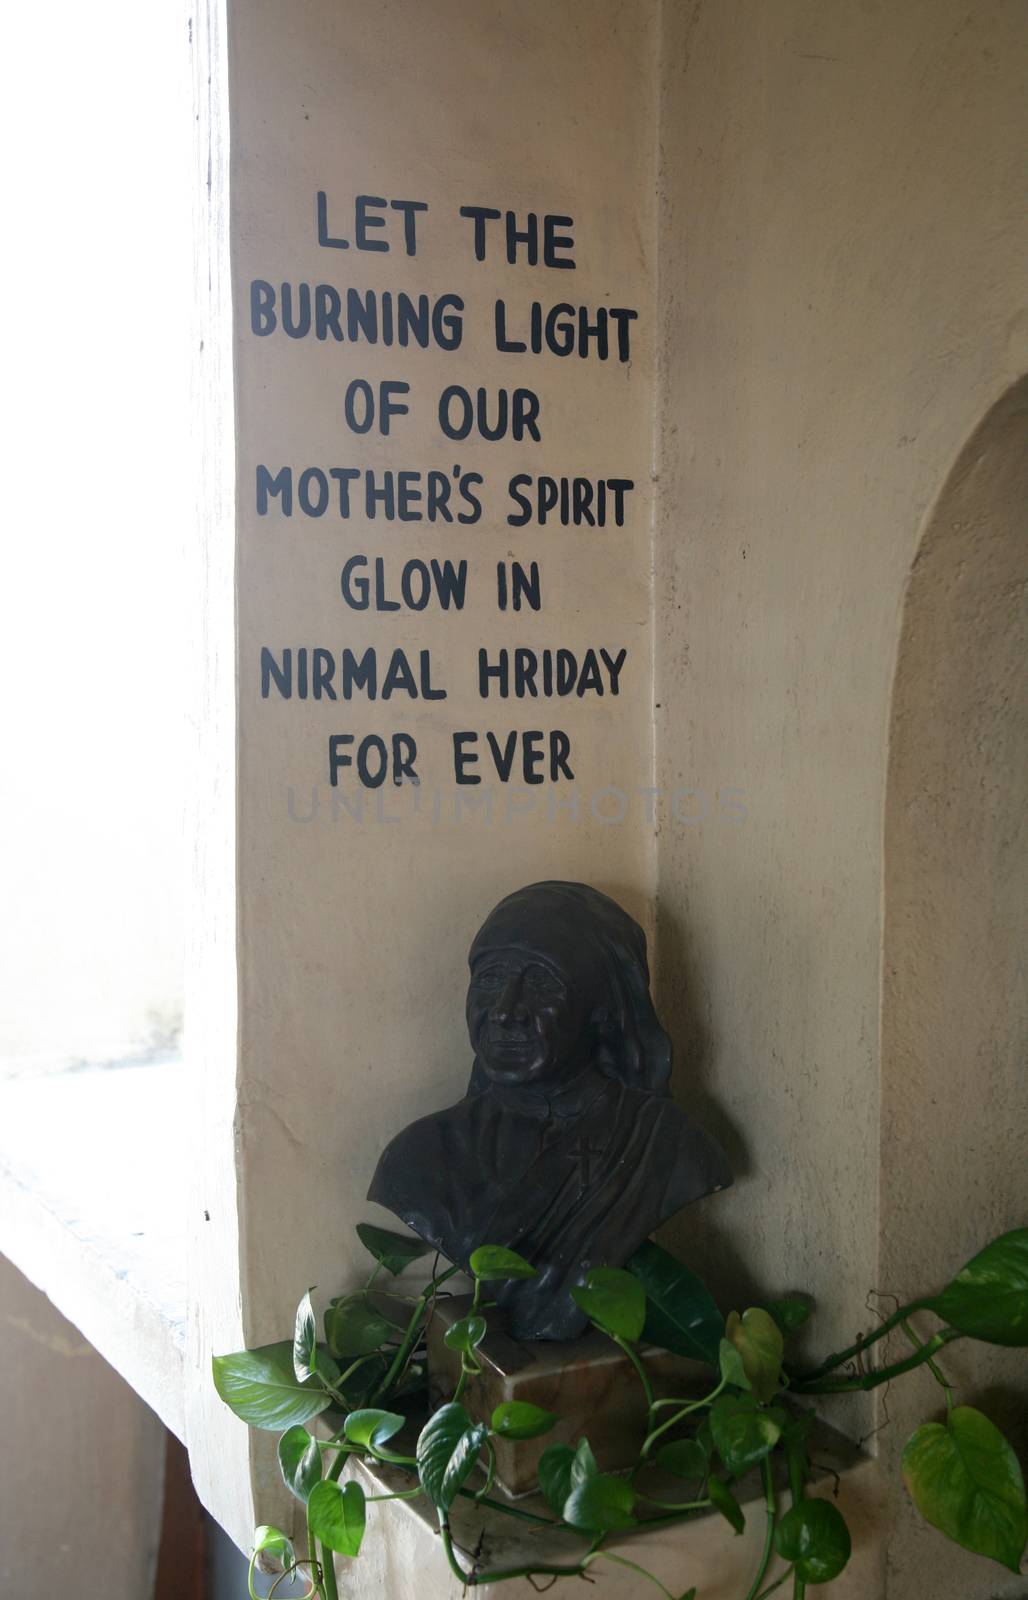 Nirmal Hriday, Home for the Sick and Dying Destitutes, one of the buildings established by the Mother Teresa and run by the Missionaries of Charity in Kolkata, India on January 24, 2009.